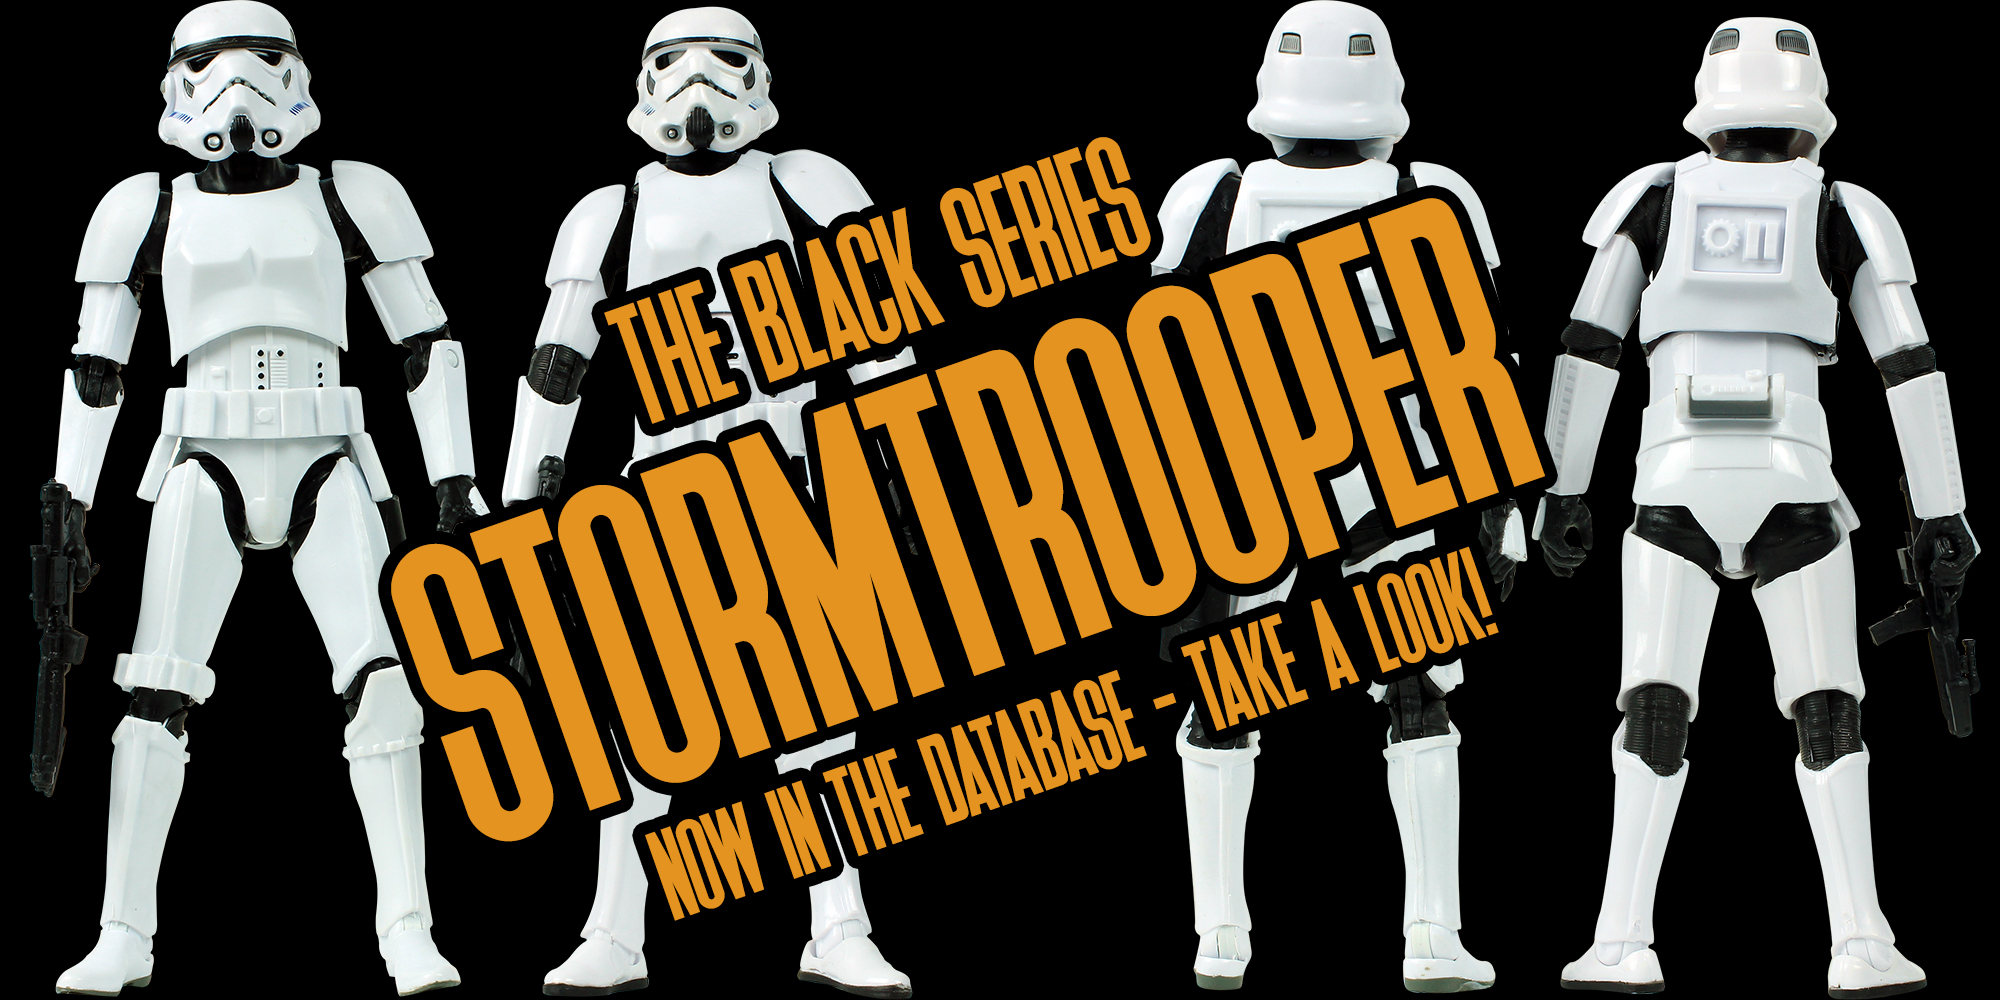 The Black Series Stormtrooper Added